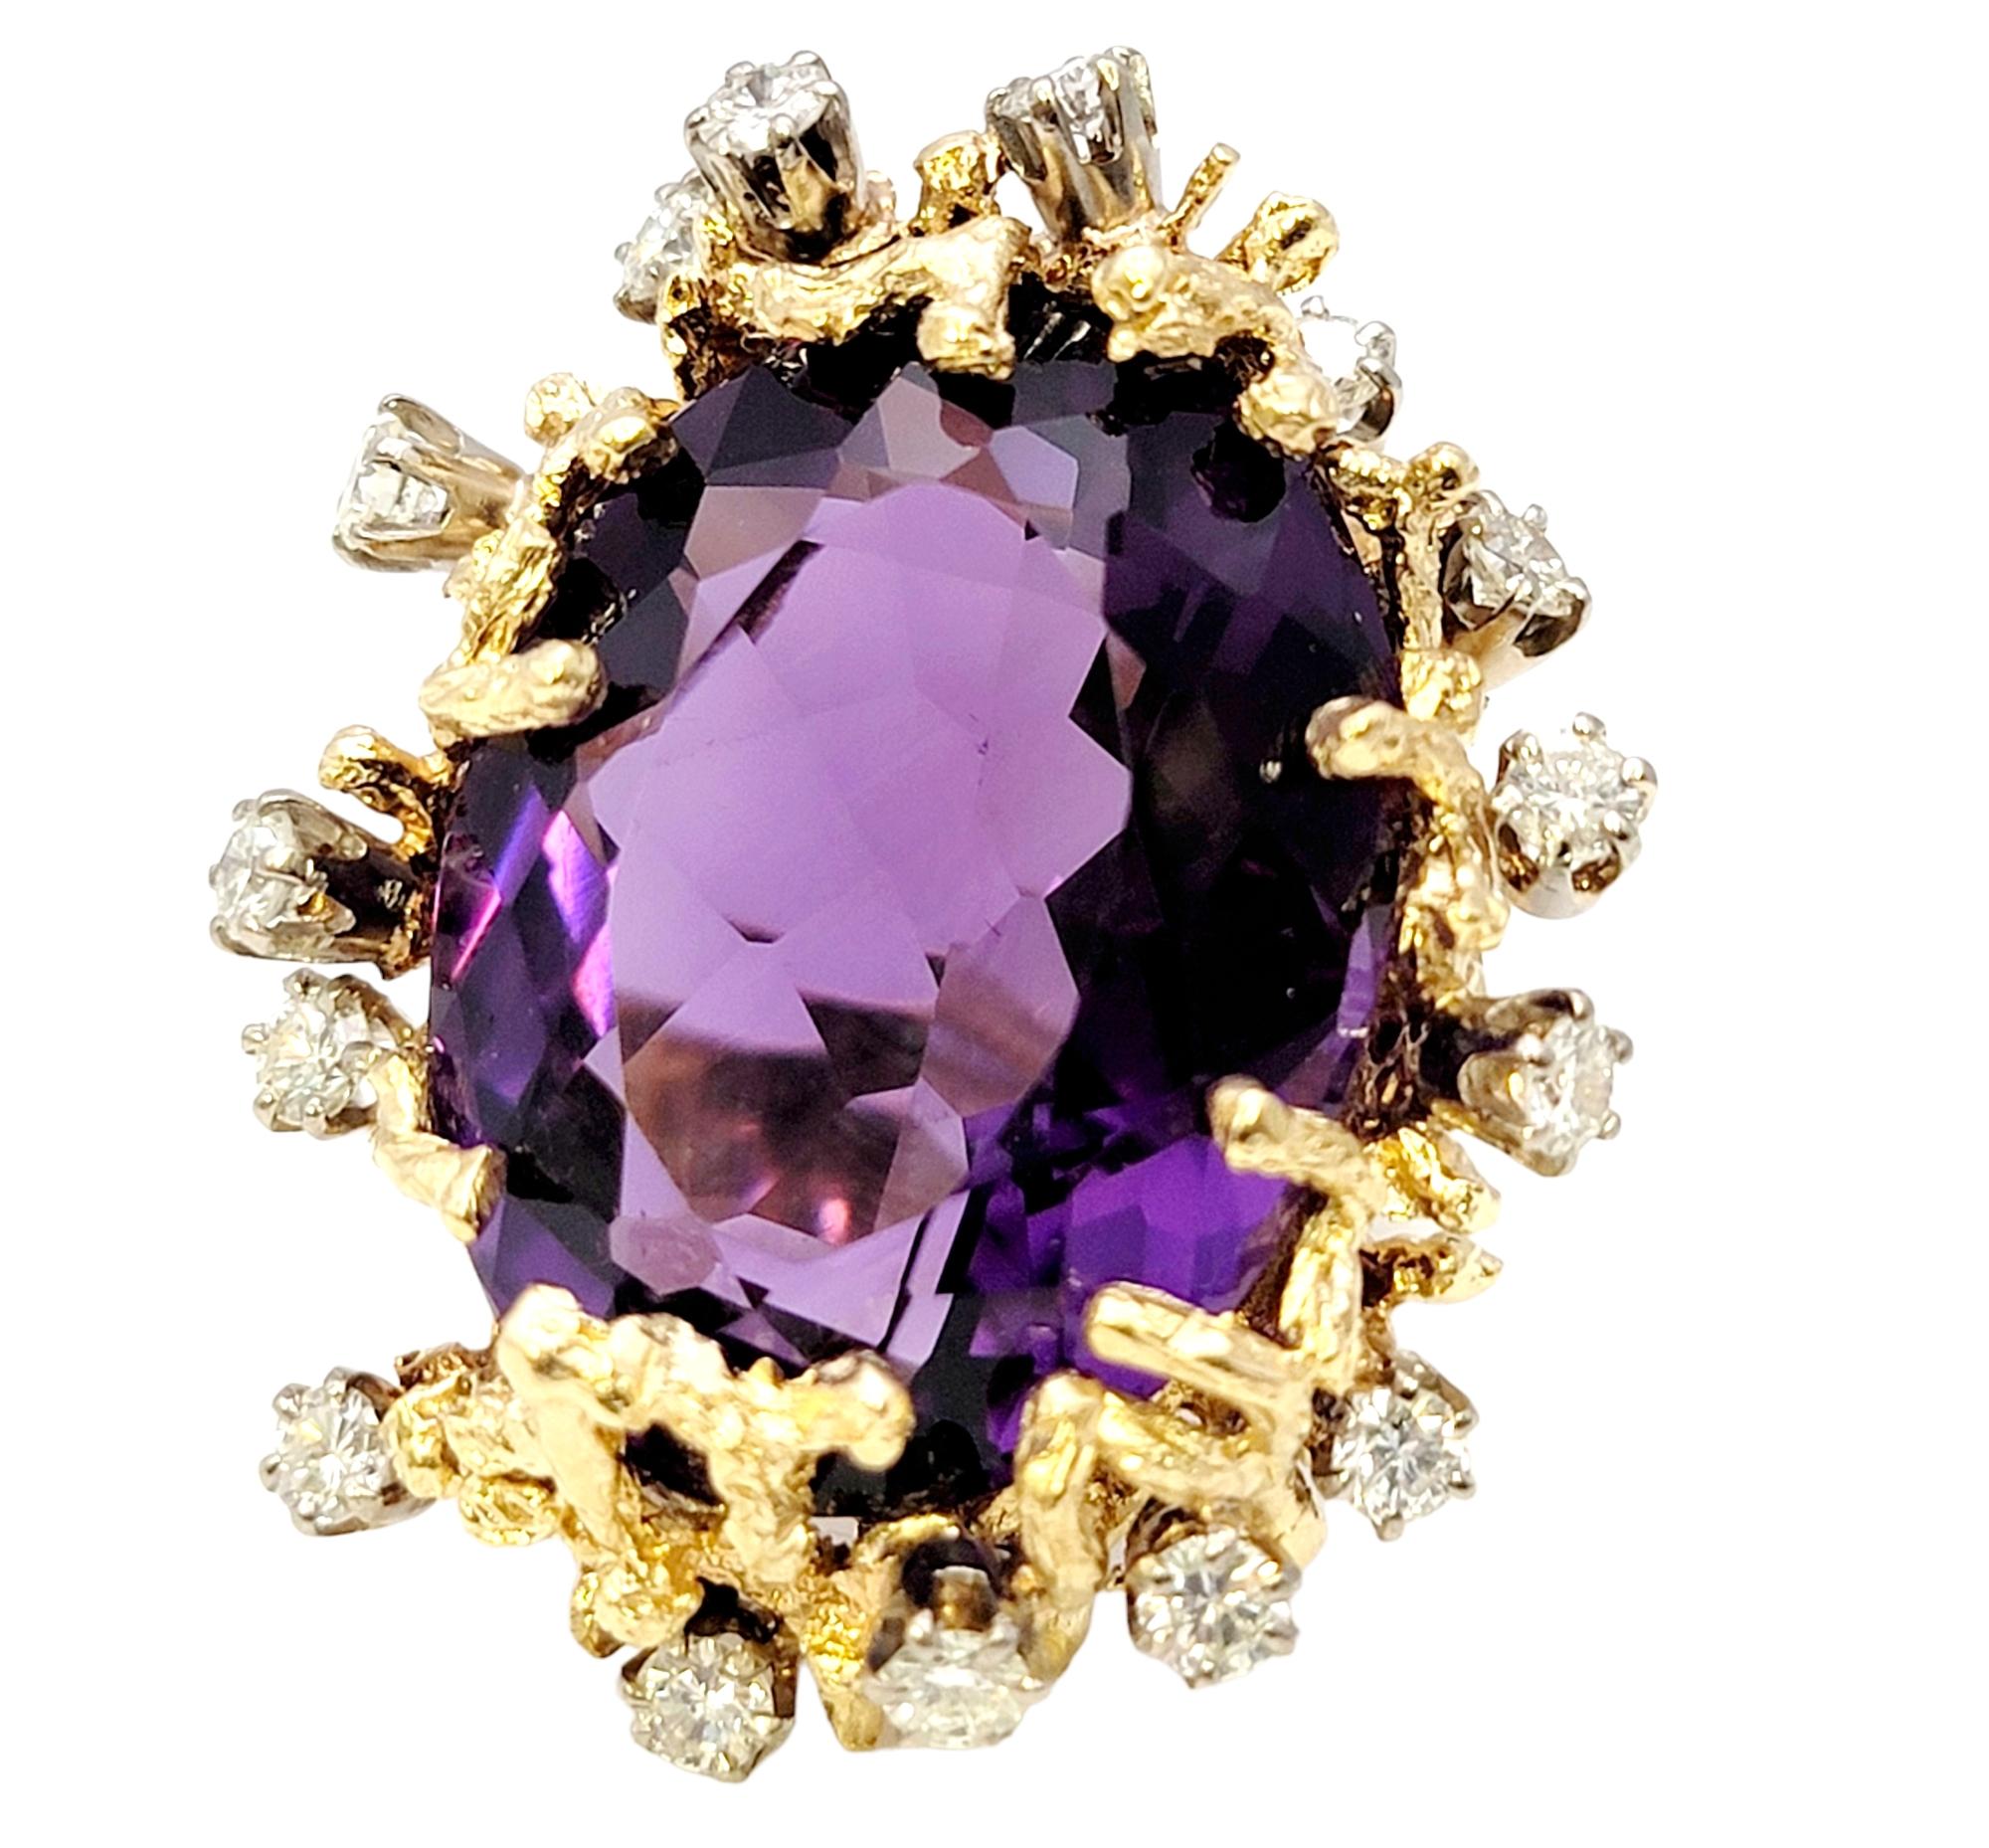 Ring size: 6

This striking, colorful cocktail ring has all the wow factor you've been looking for! Massive in both size and color, this exceptional piece will not go unnoticed. 

The stunning oval brilliant cut natural amethyst stone is an